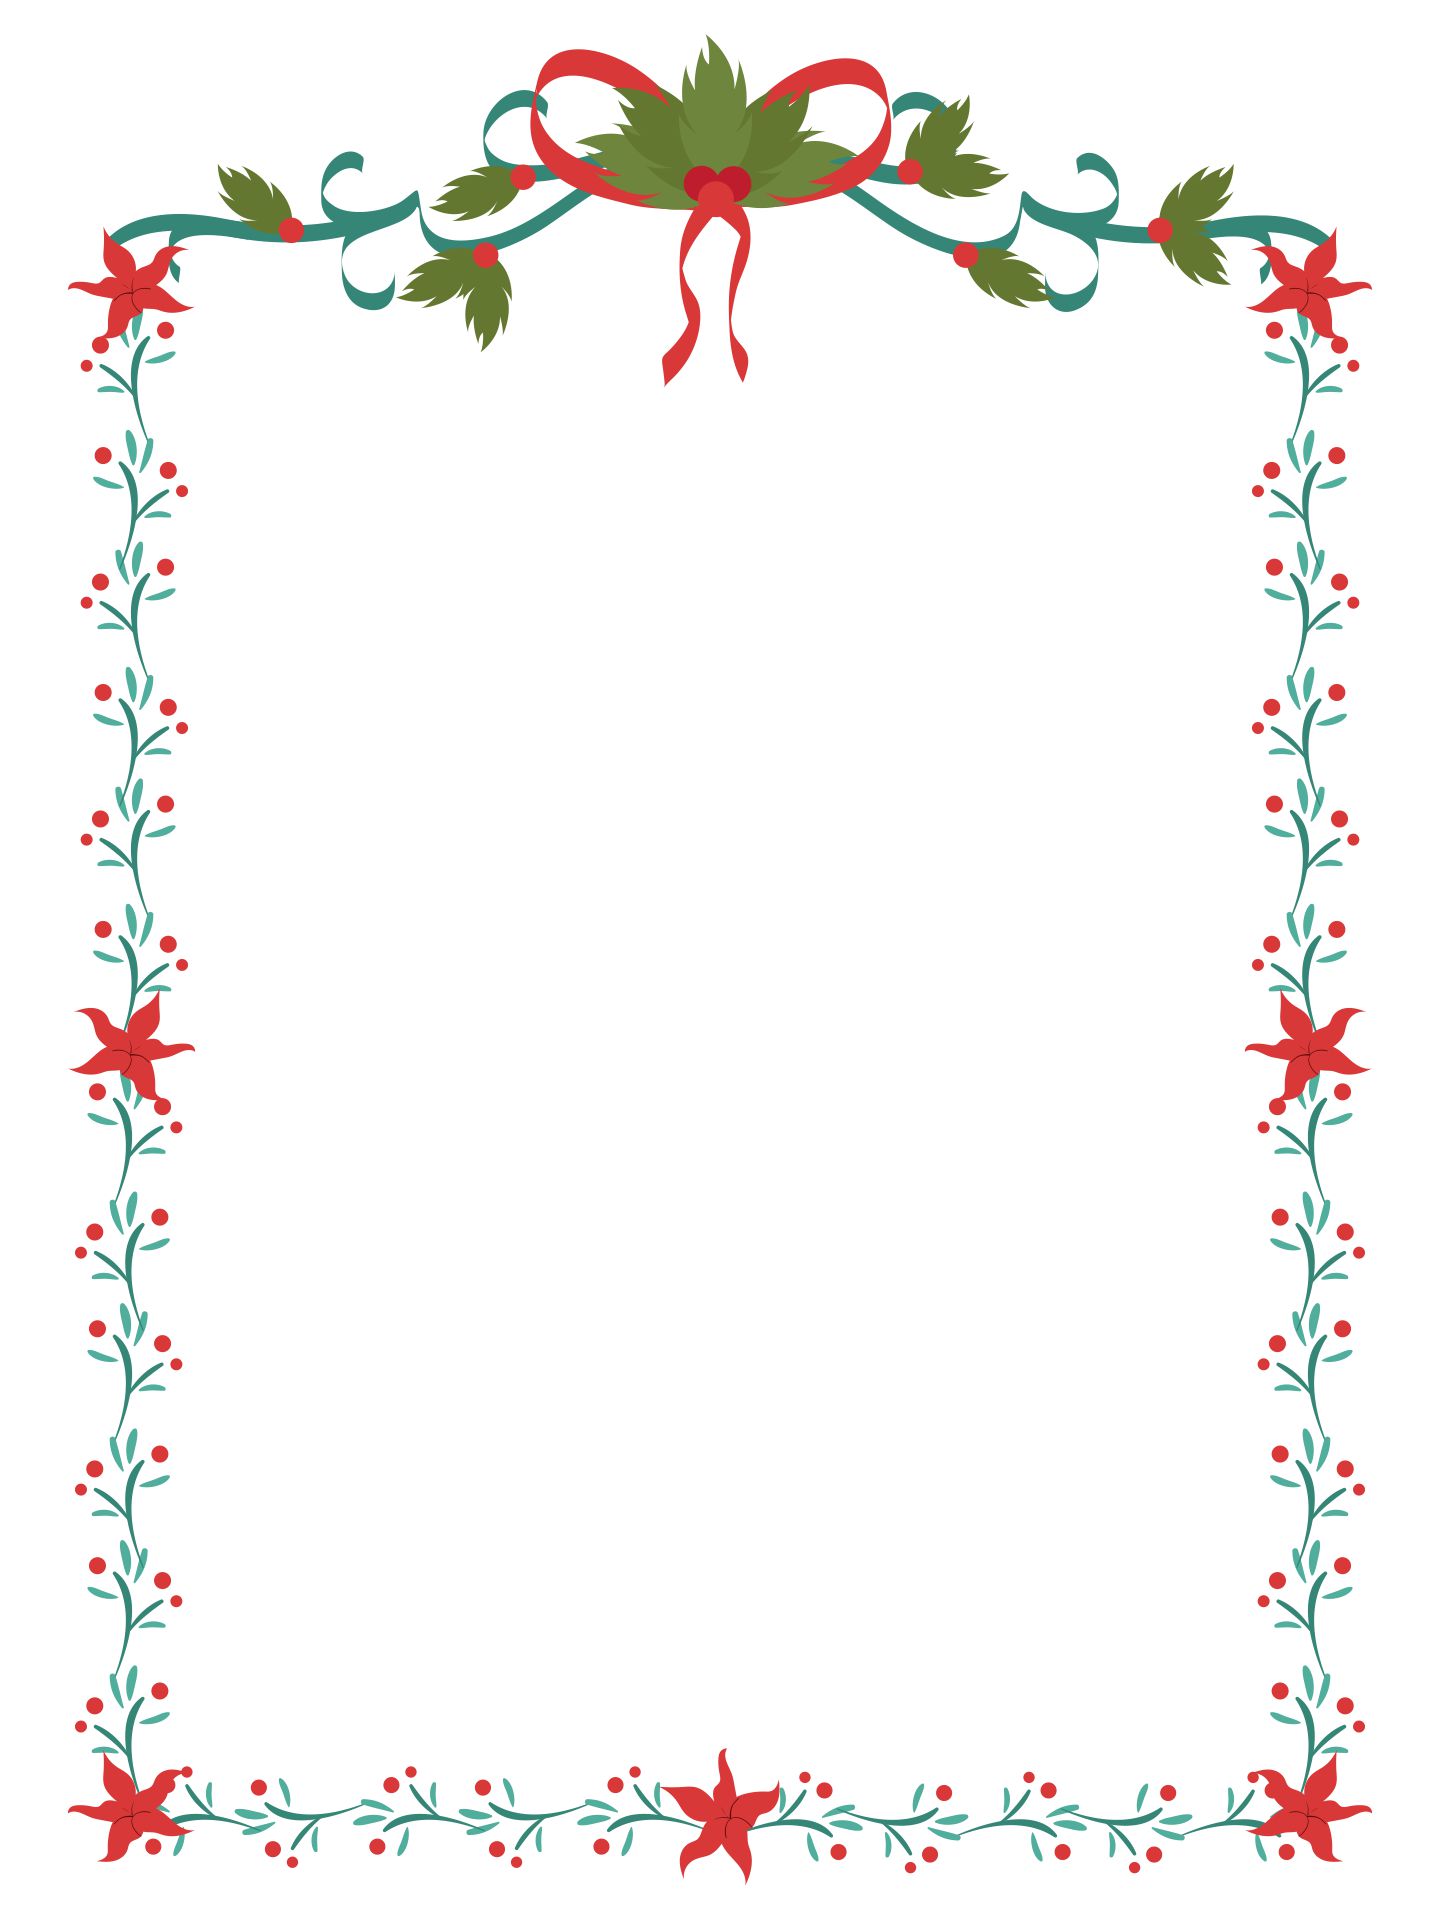 6 Best Images of Free Printable Christmas Stationary Borders Free